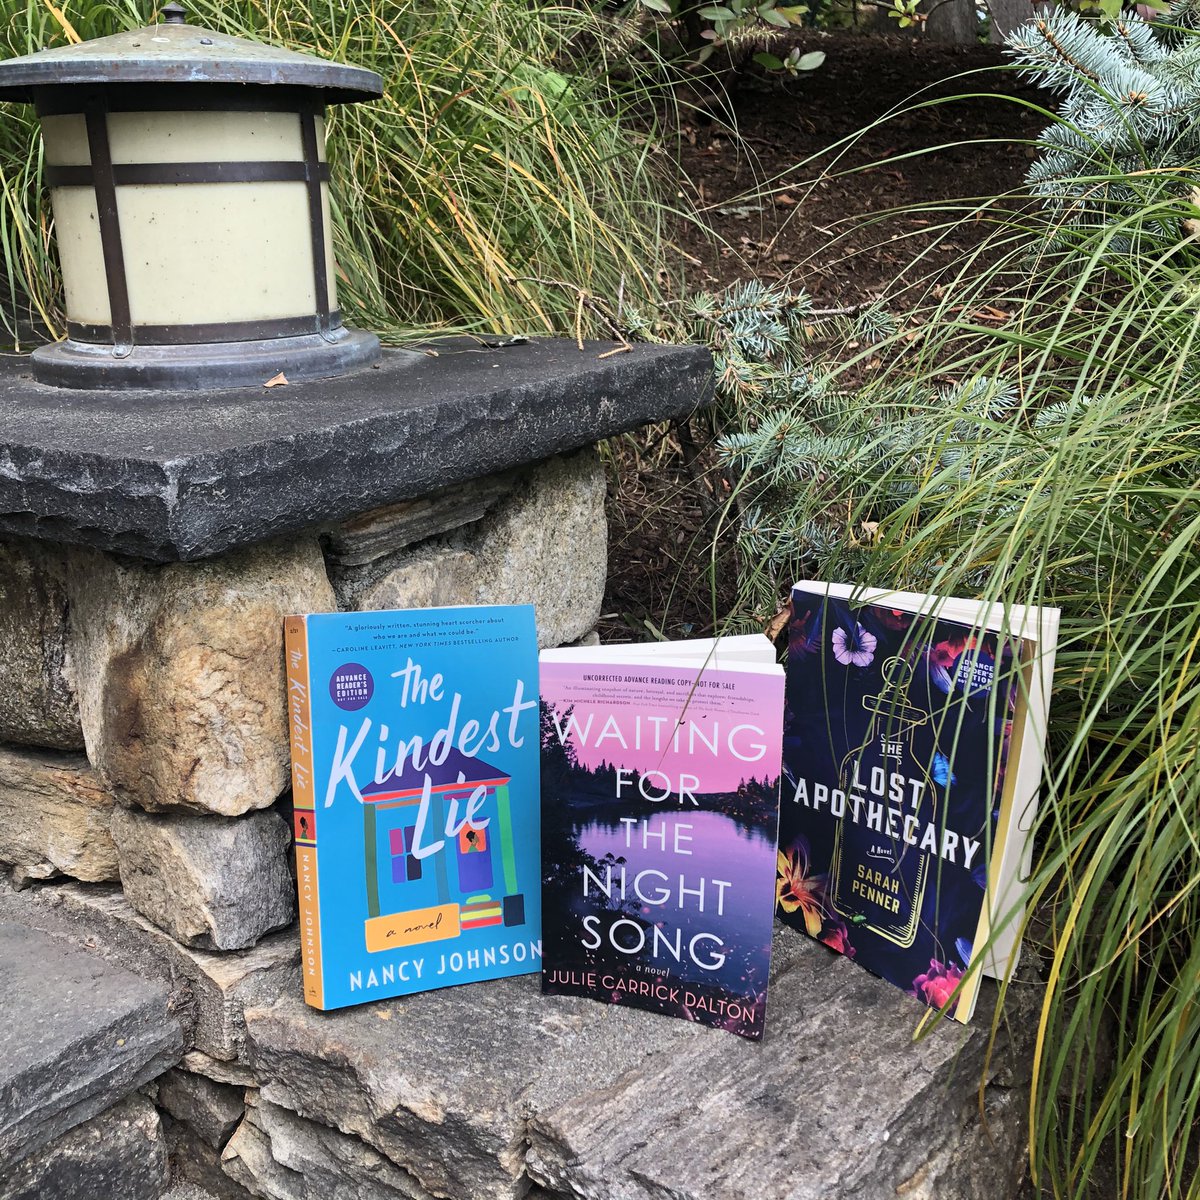 My book baby WAITING FOR THE NIGHT SONG hanging with friends on a sunny afternoon.  #thekindestlie #thelostapothecary #waitingforthenightsong #2021debuts #debutnovel